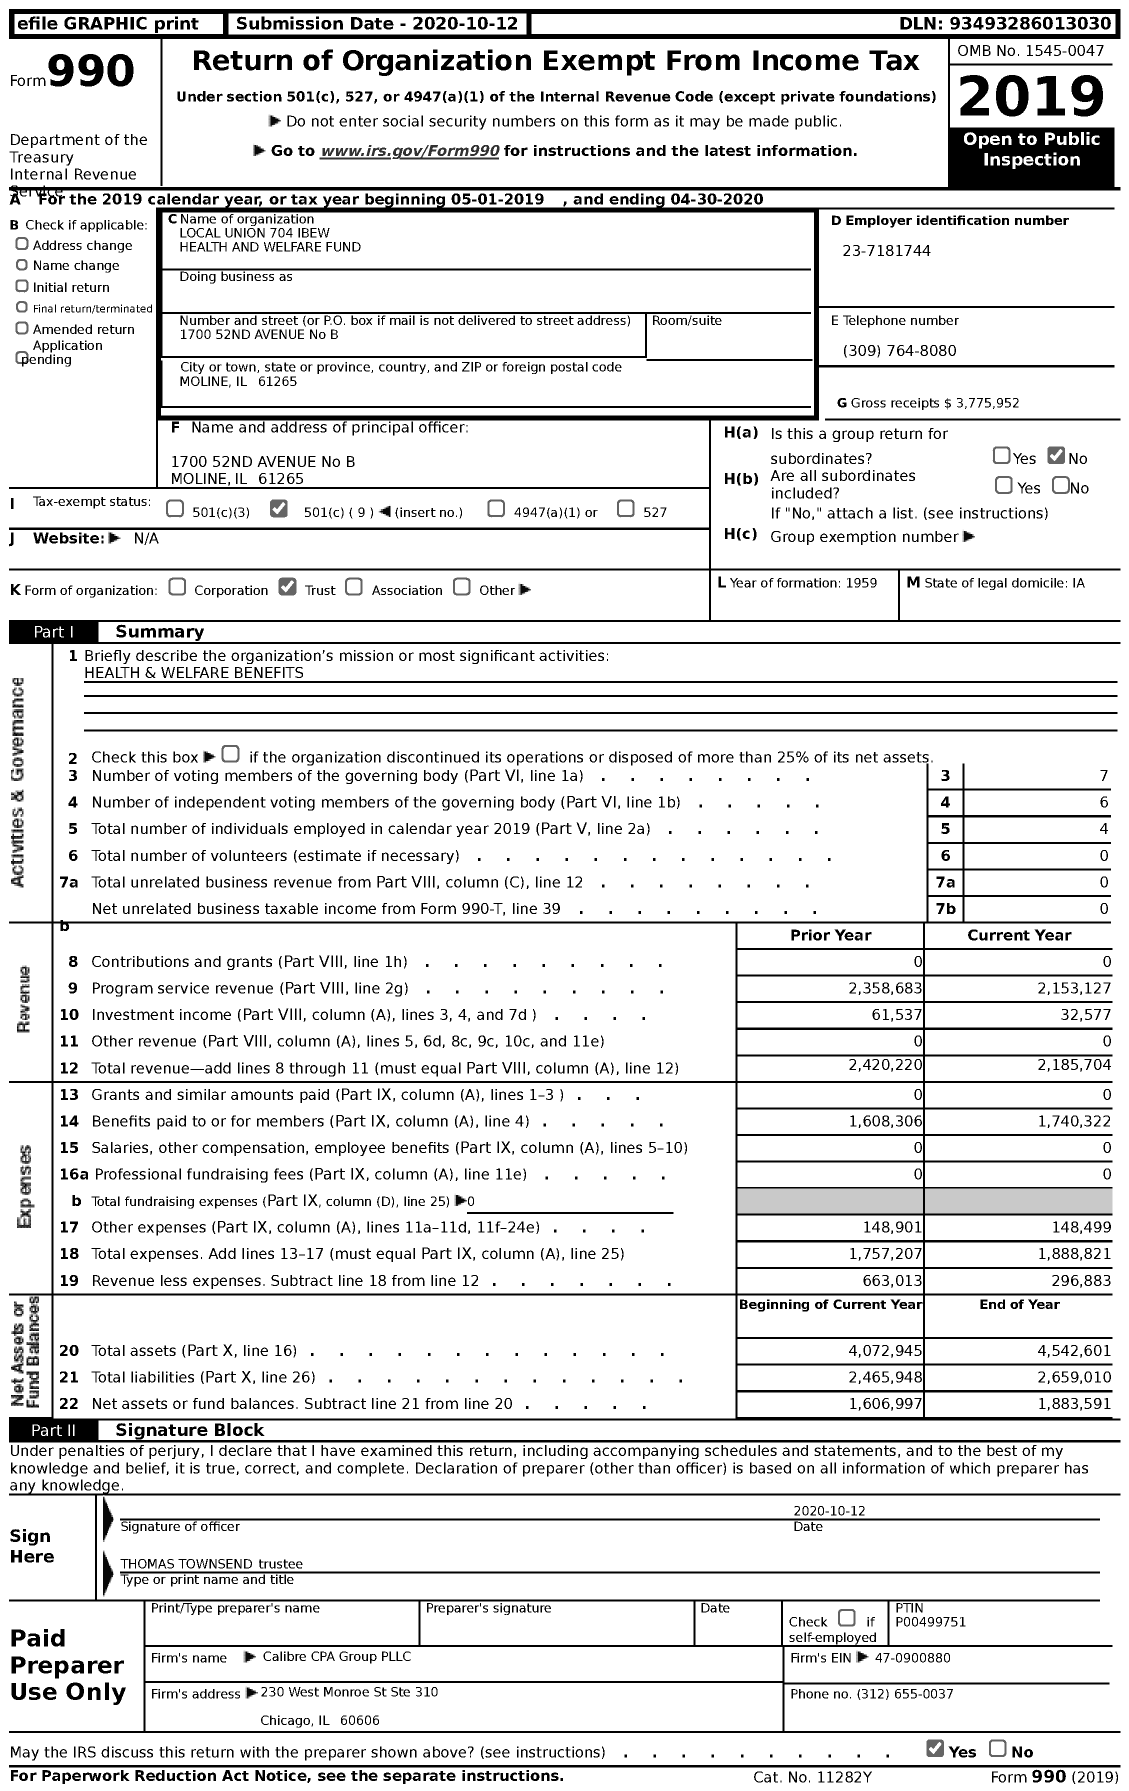 Image of first page of 2019 Form 990 for Local Union 704 IBEW Health and Welfare Fund